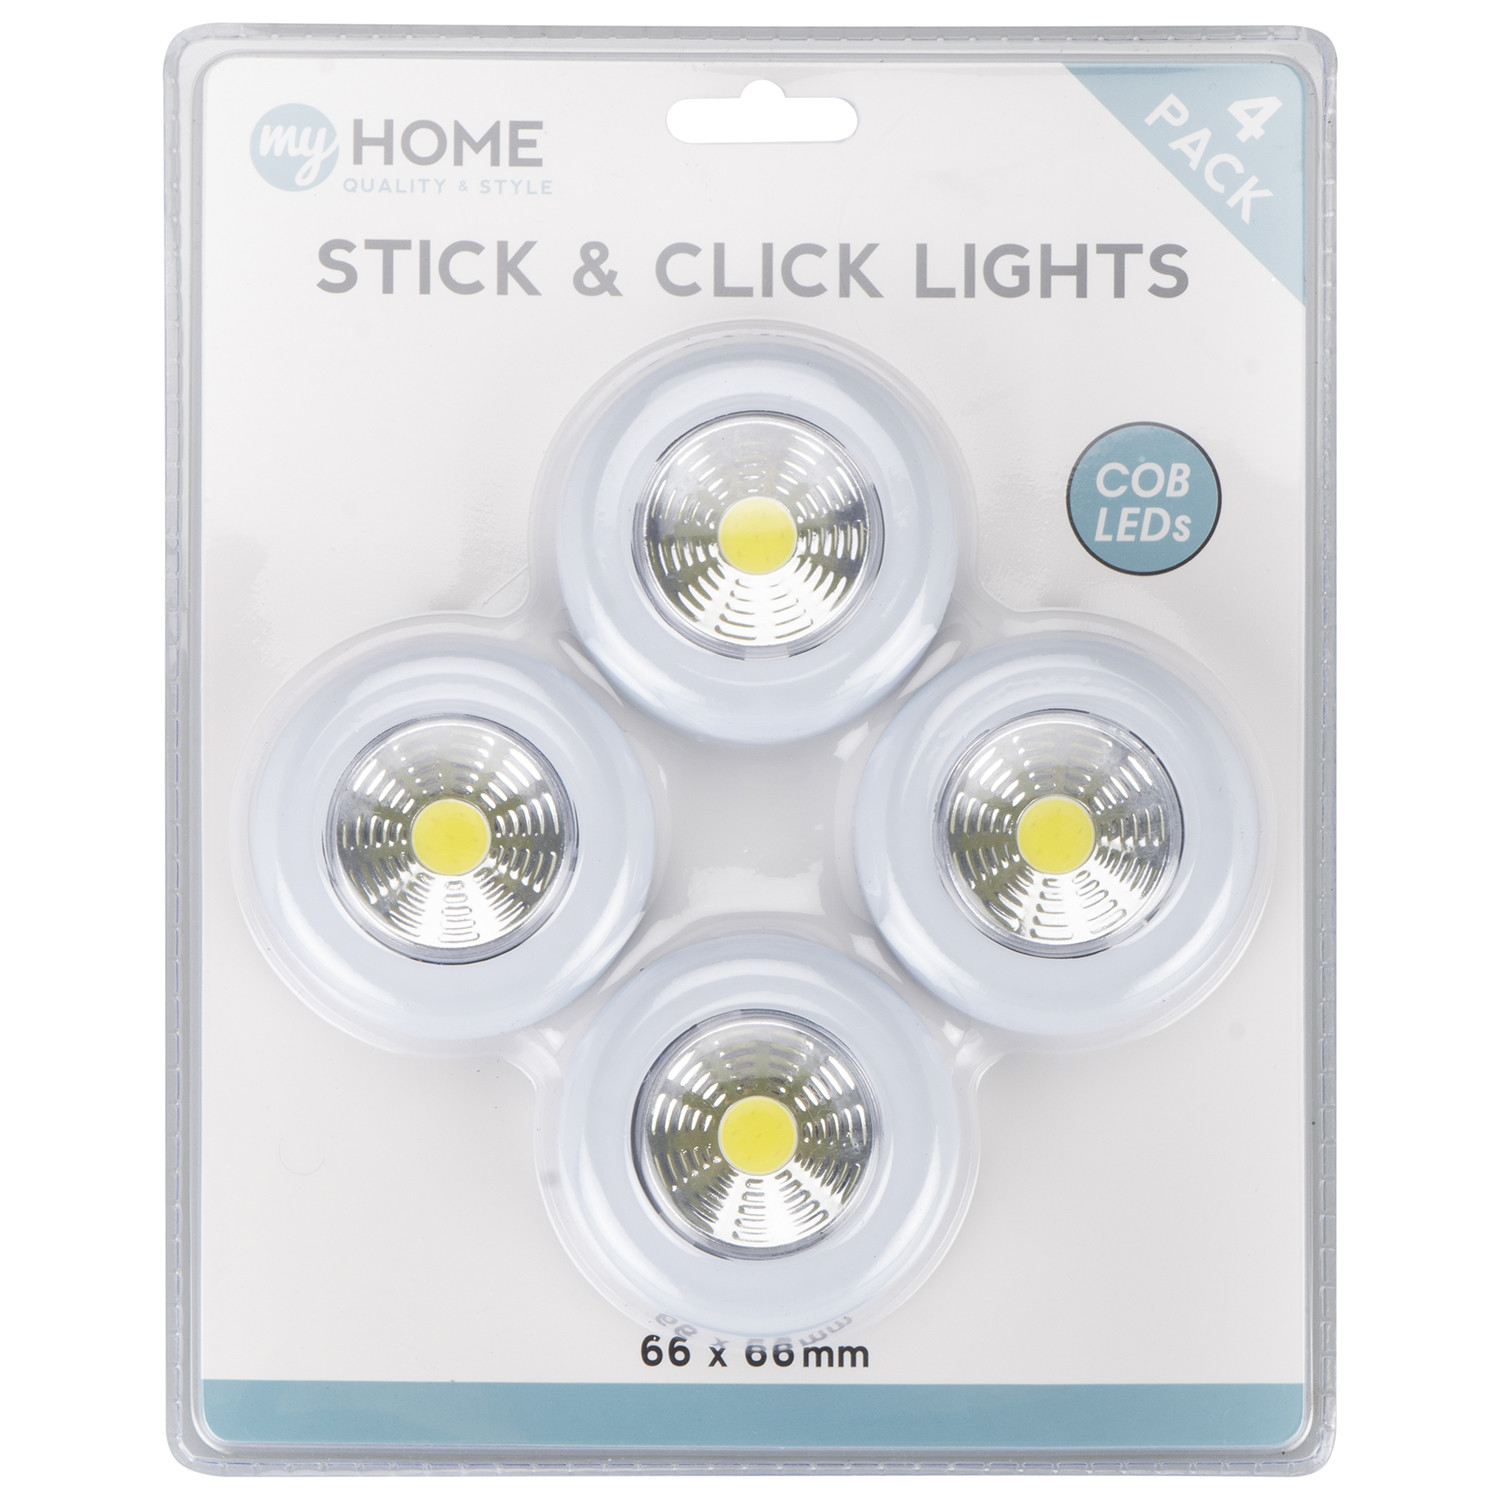 My Home COB LED Stick and Click Lights Image